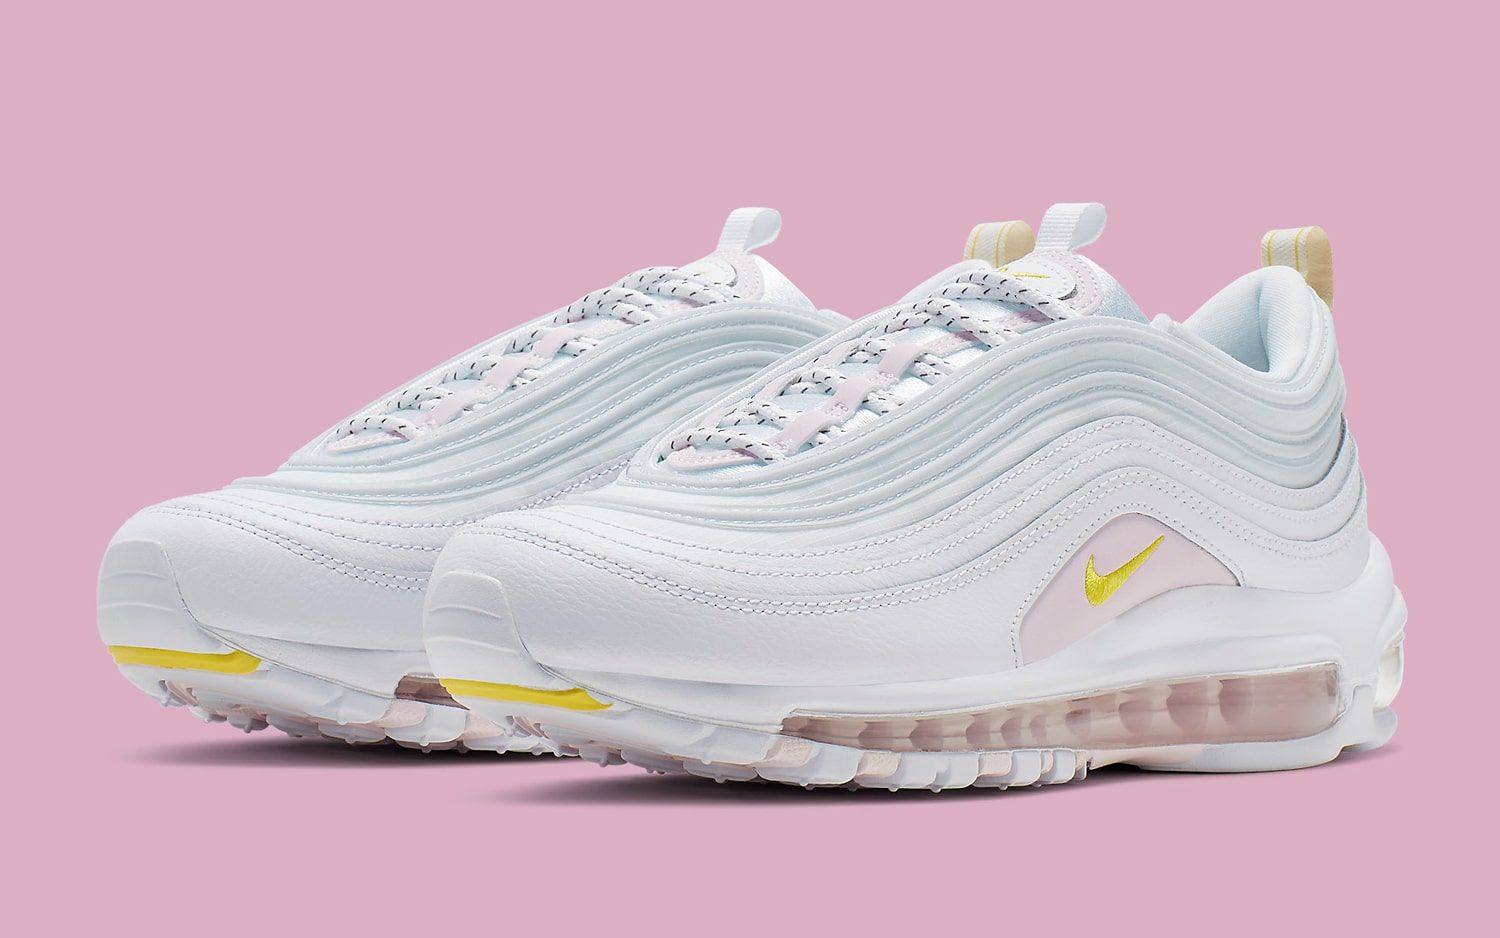 97s pink and white